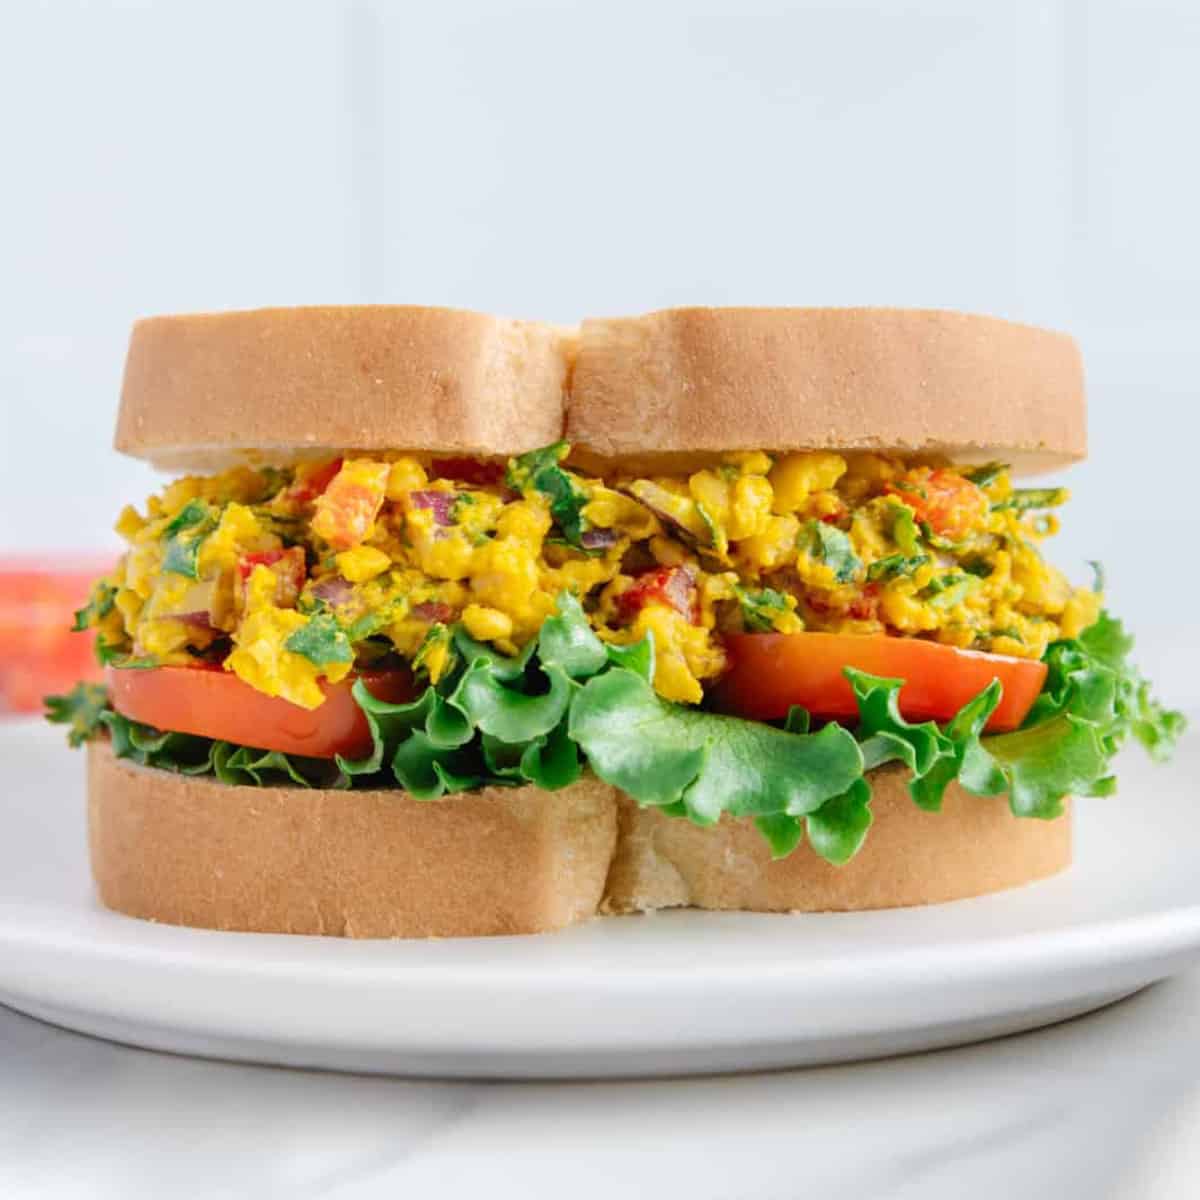 beautiful and bright yellow curried chickpeas salad between two bread slices.